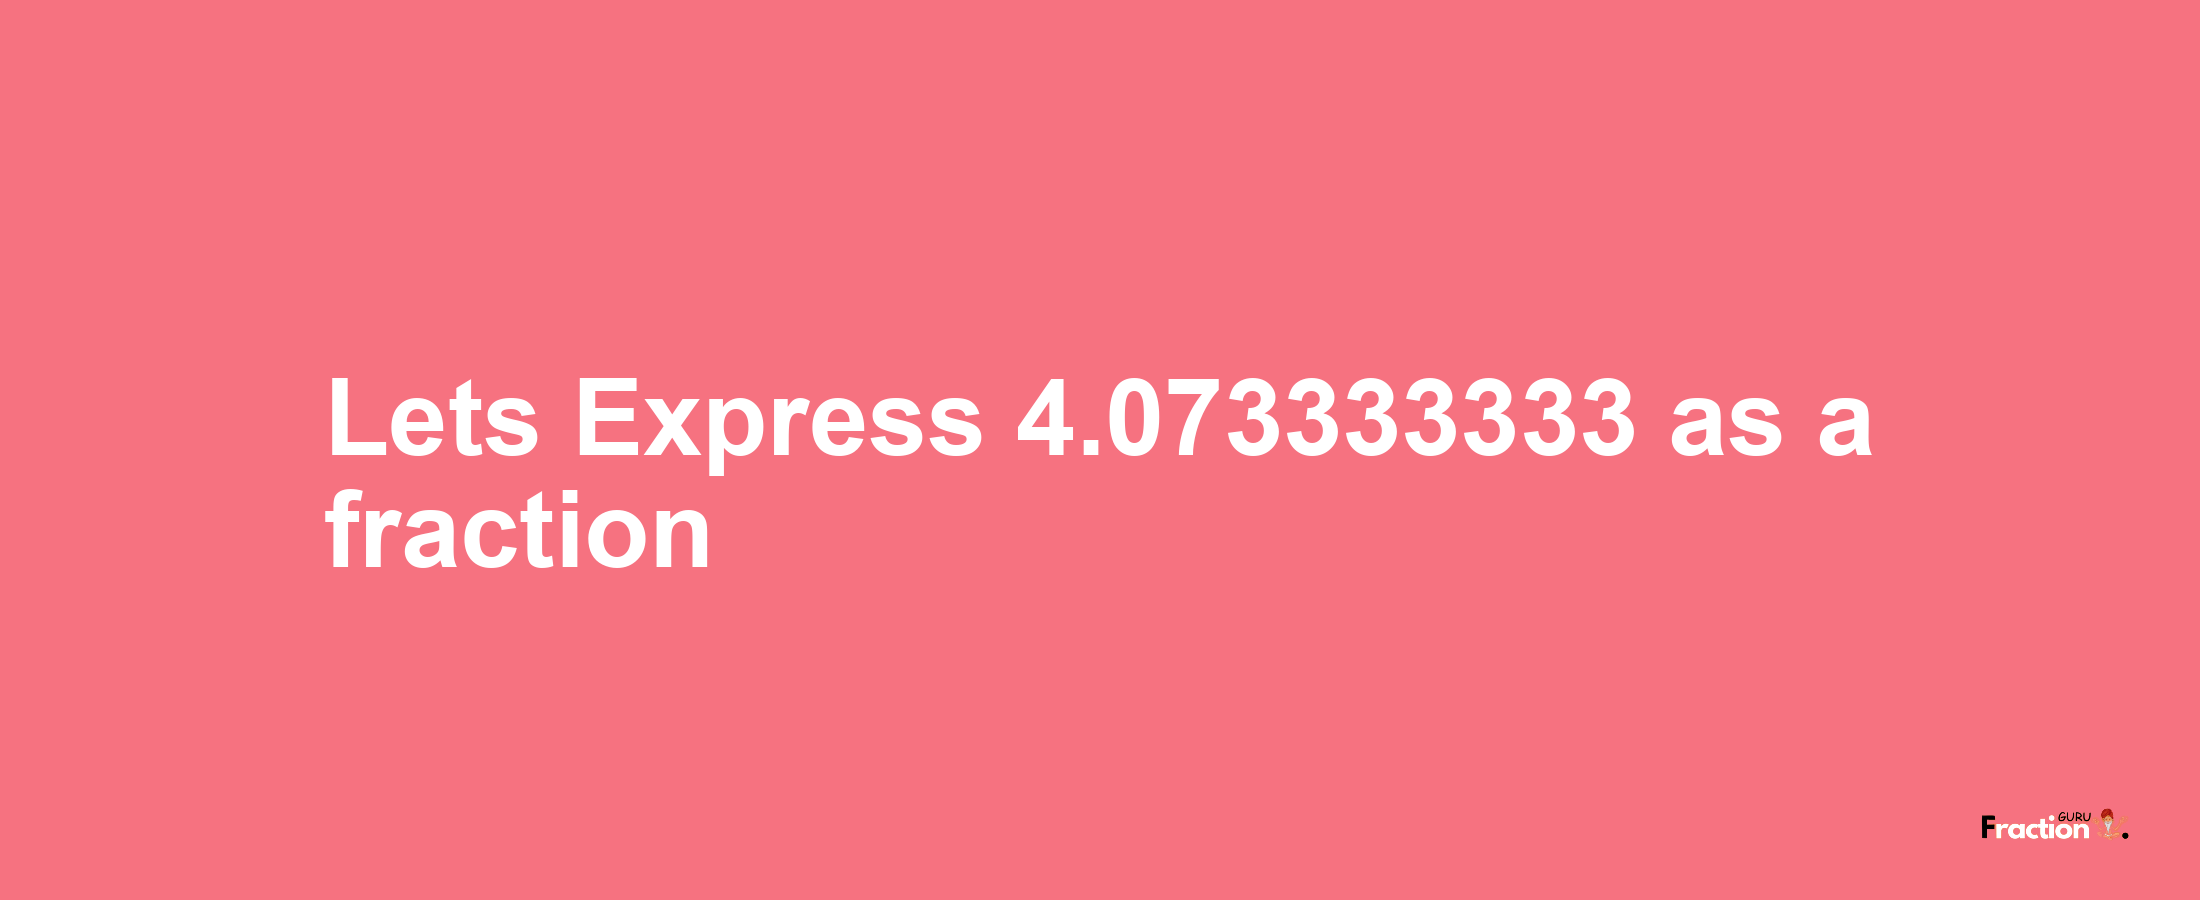 Lets Express 4.073333333 as afraction